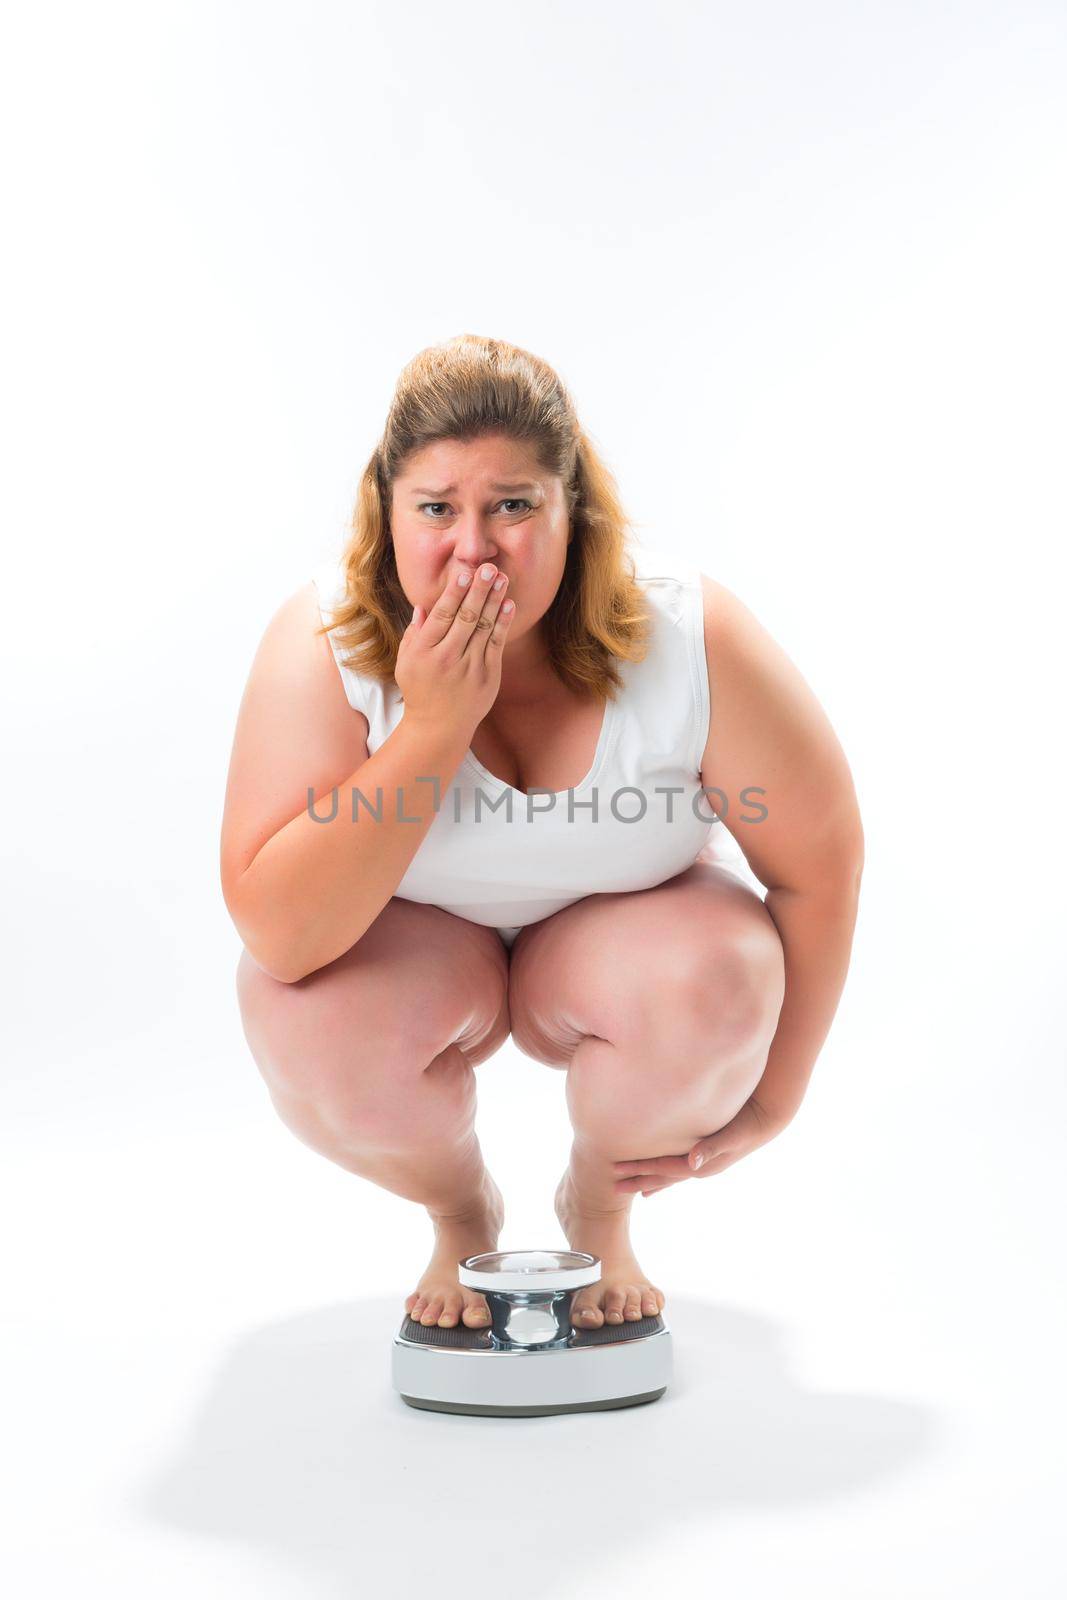 Obese young woman crouching on a scale by Kzenon